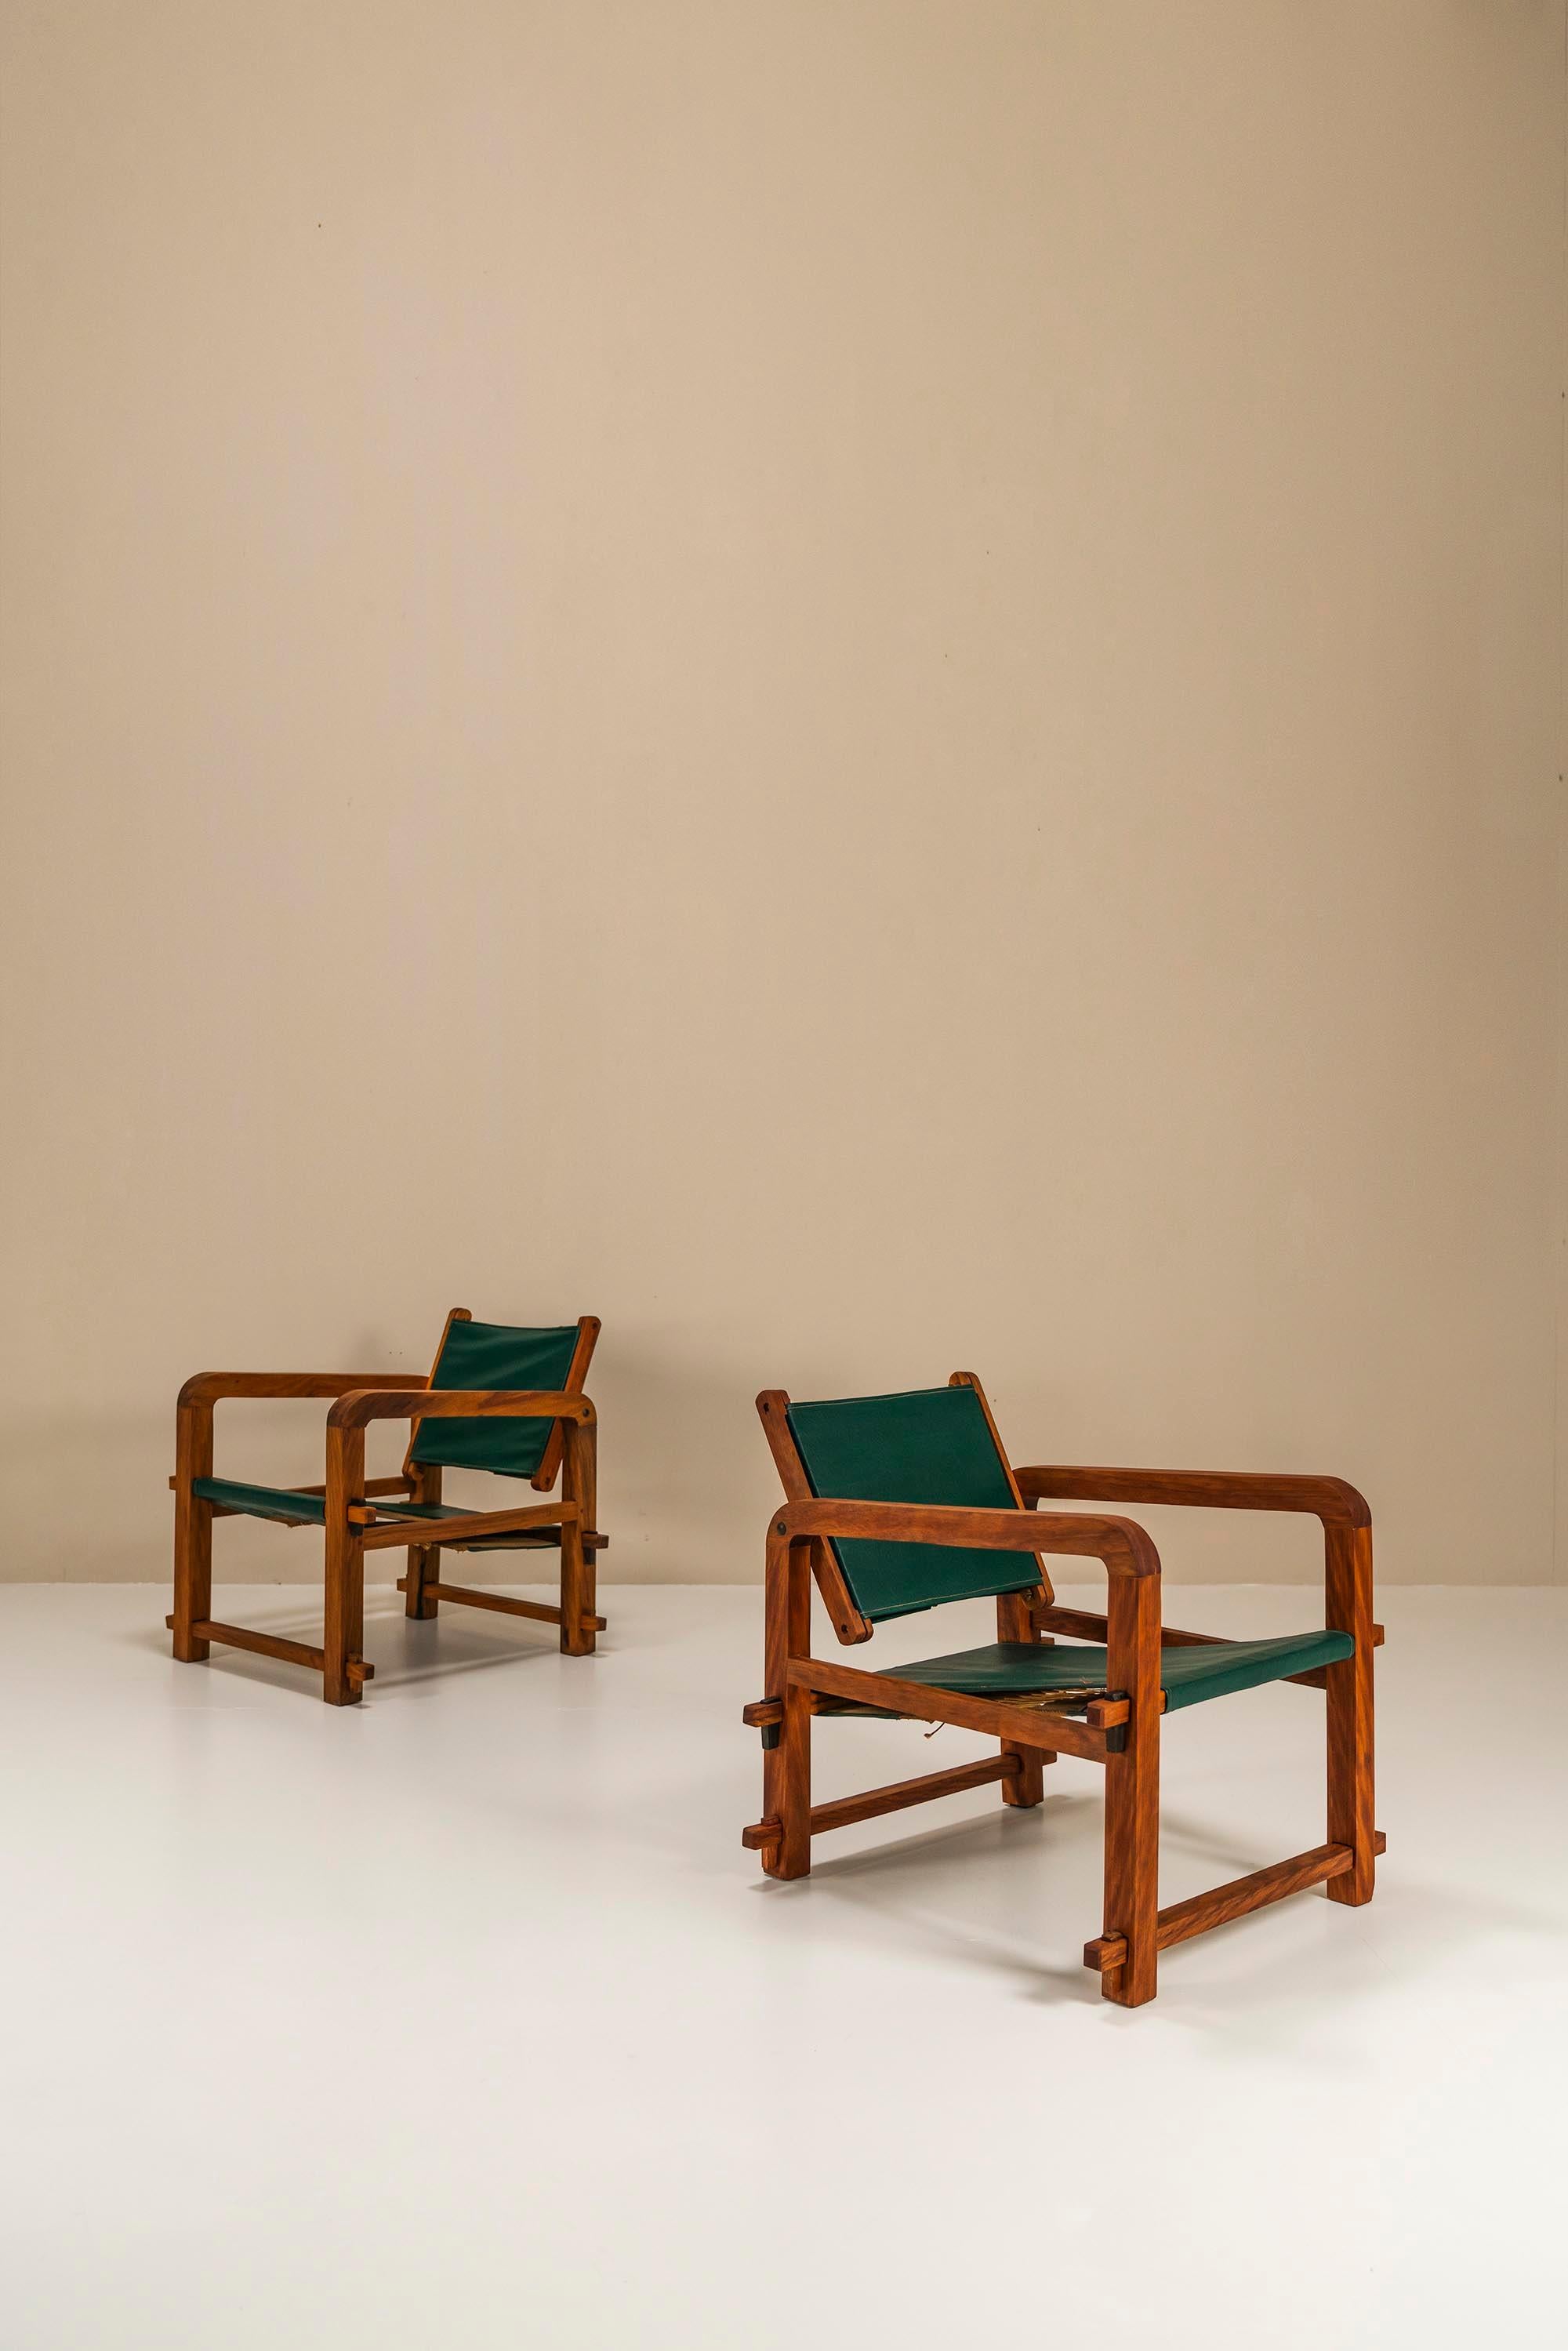 Mid-20th Century Set Of 2 Sling Chairs In Mahogany And Leather, Brazil 1960s